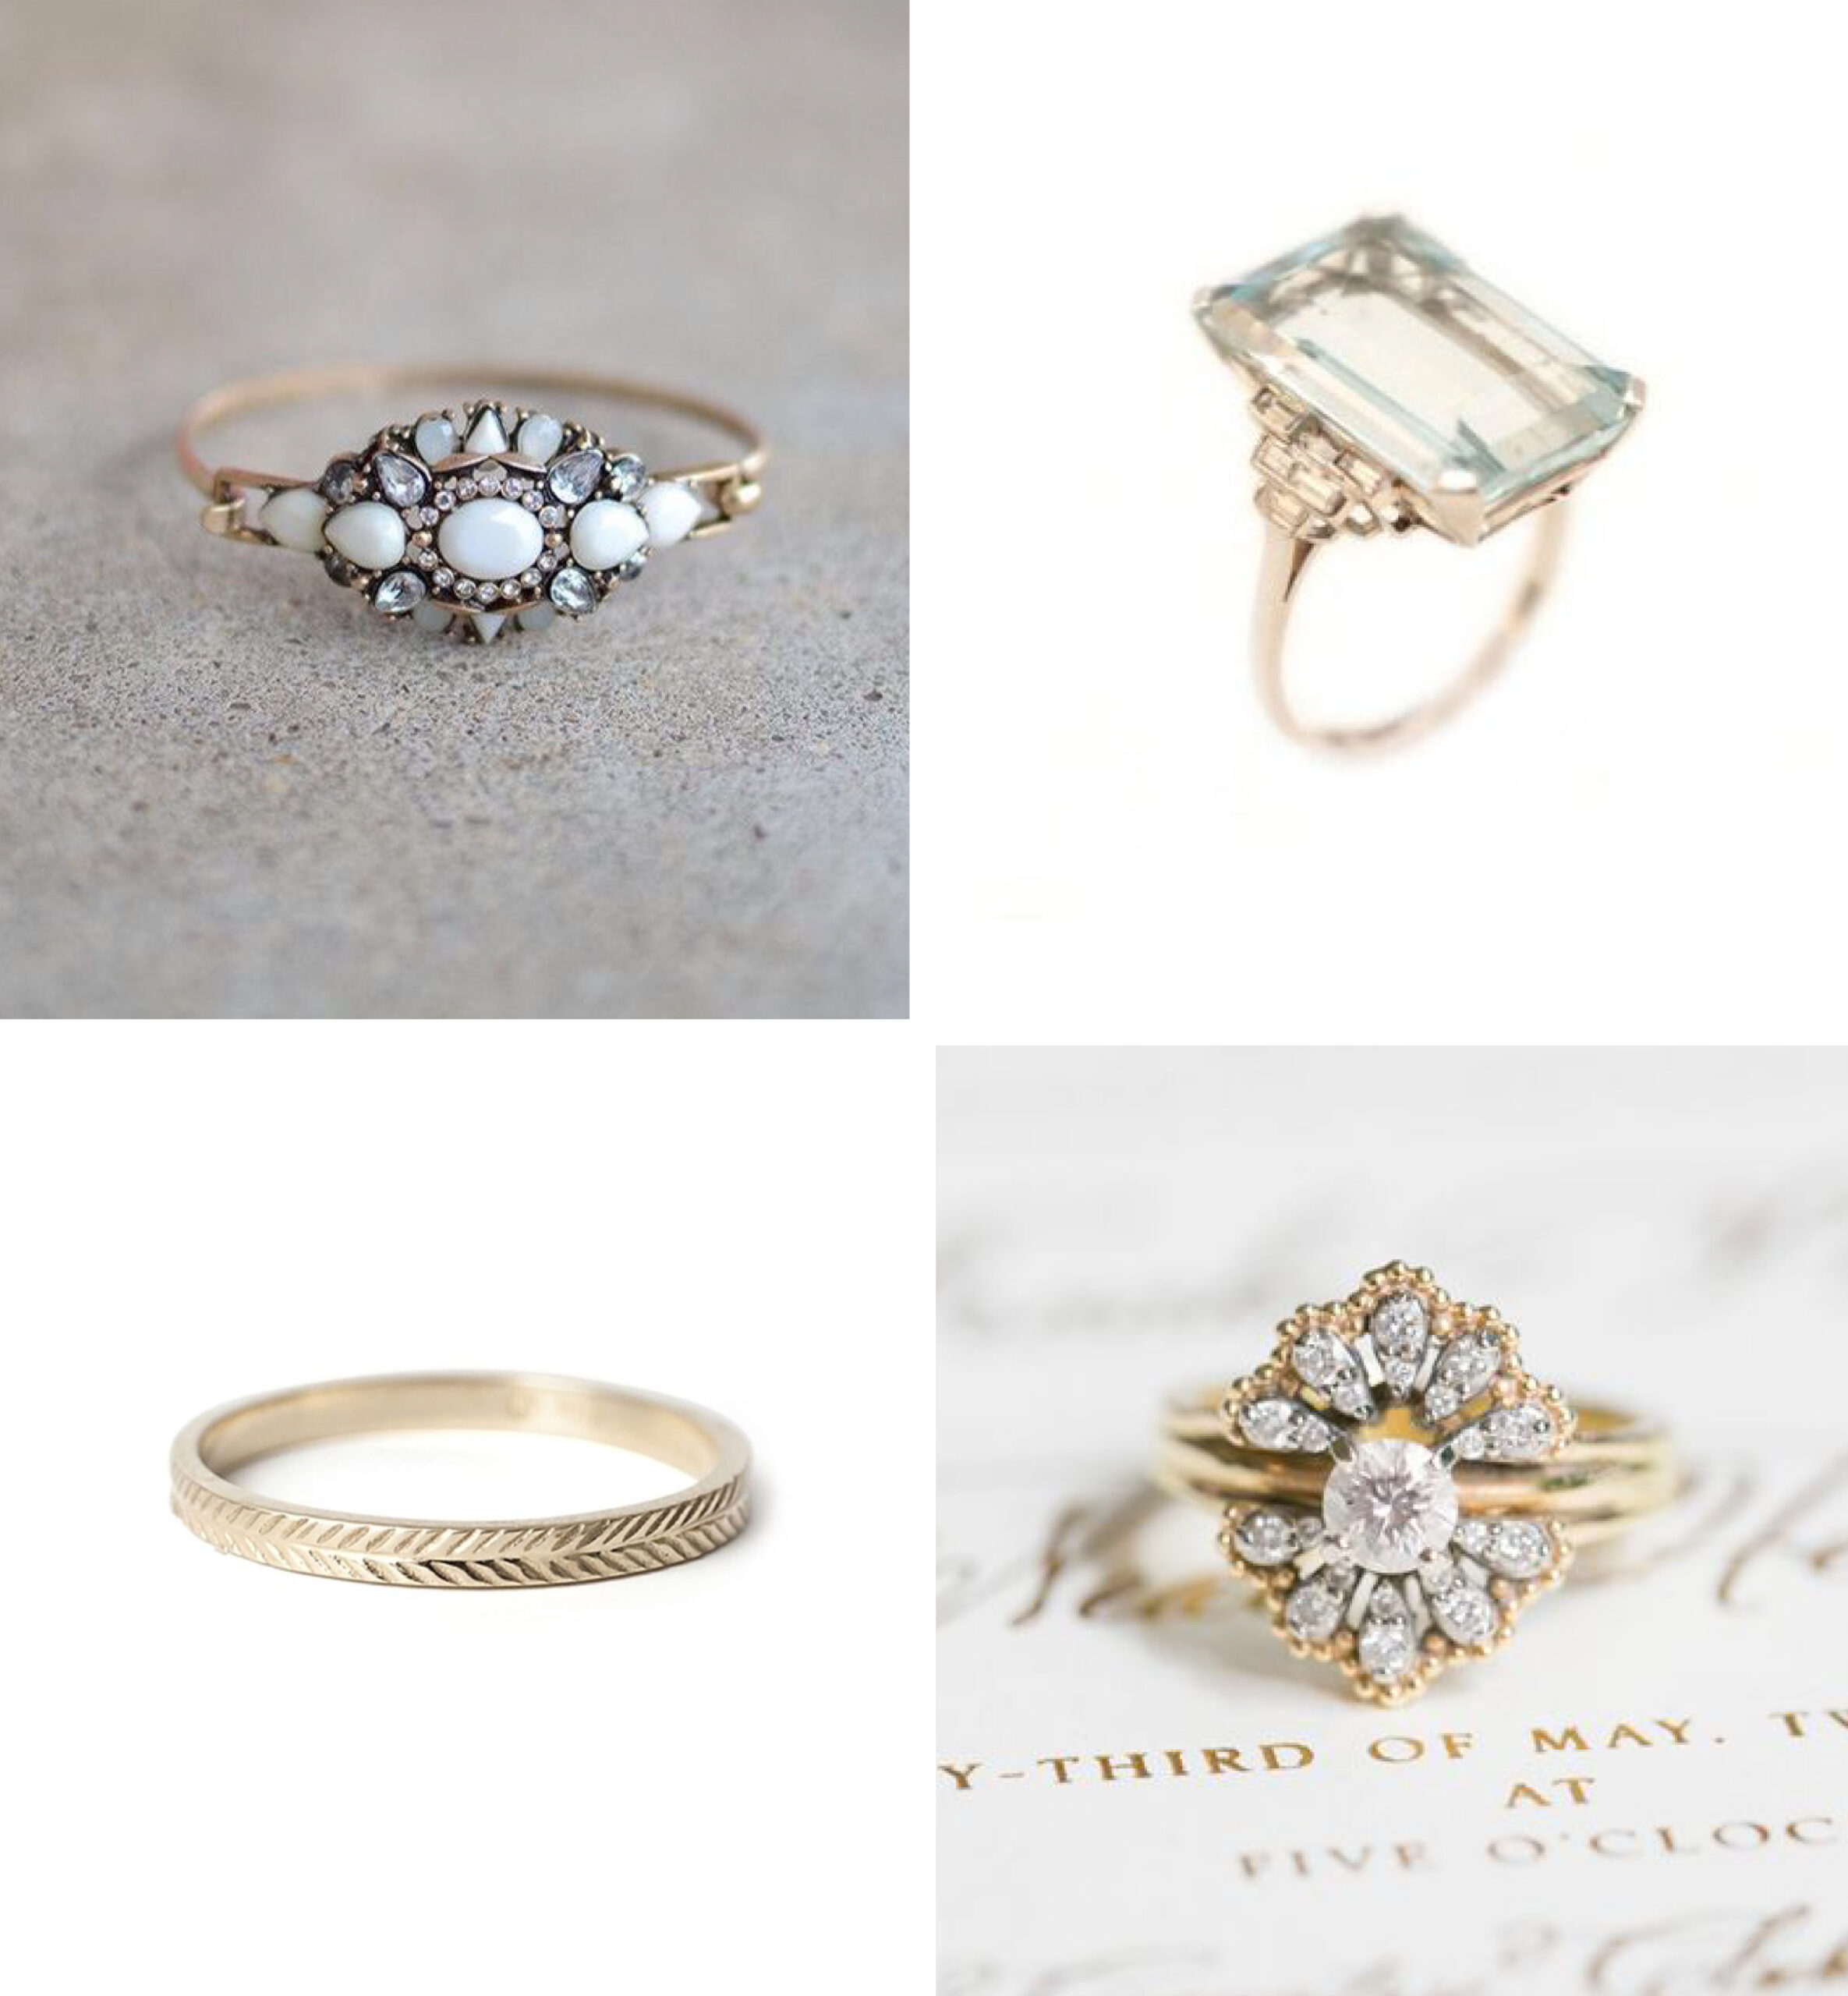 Best Engagement Rings for a Pisces – With Clarity